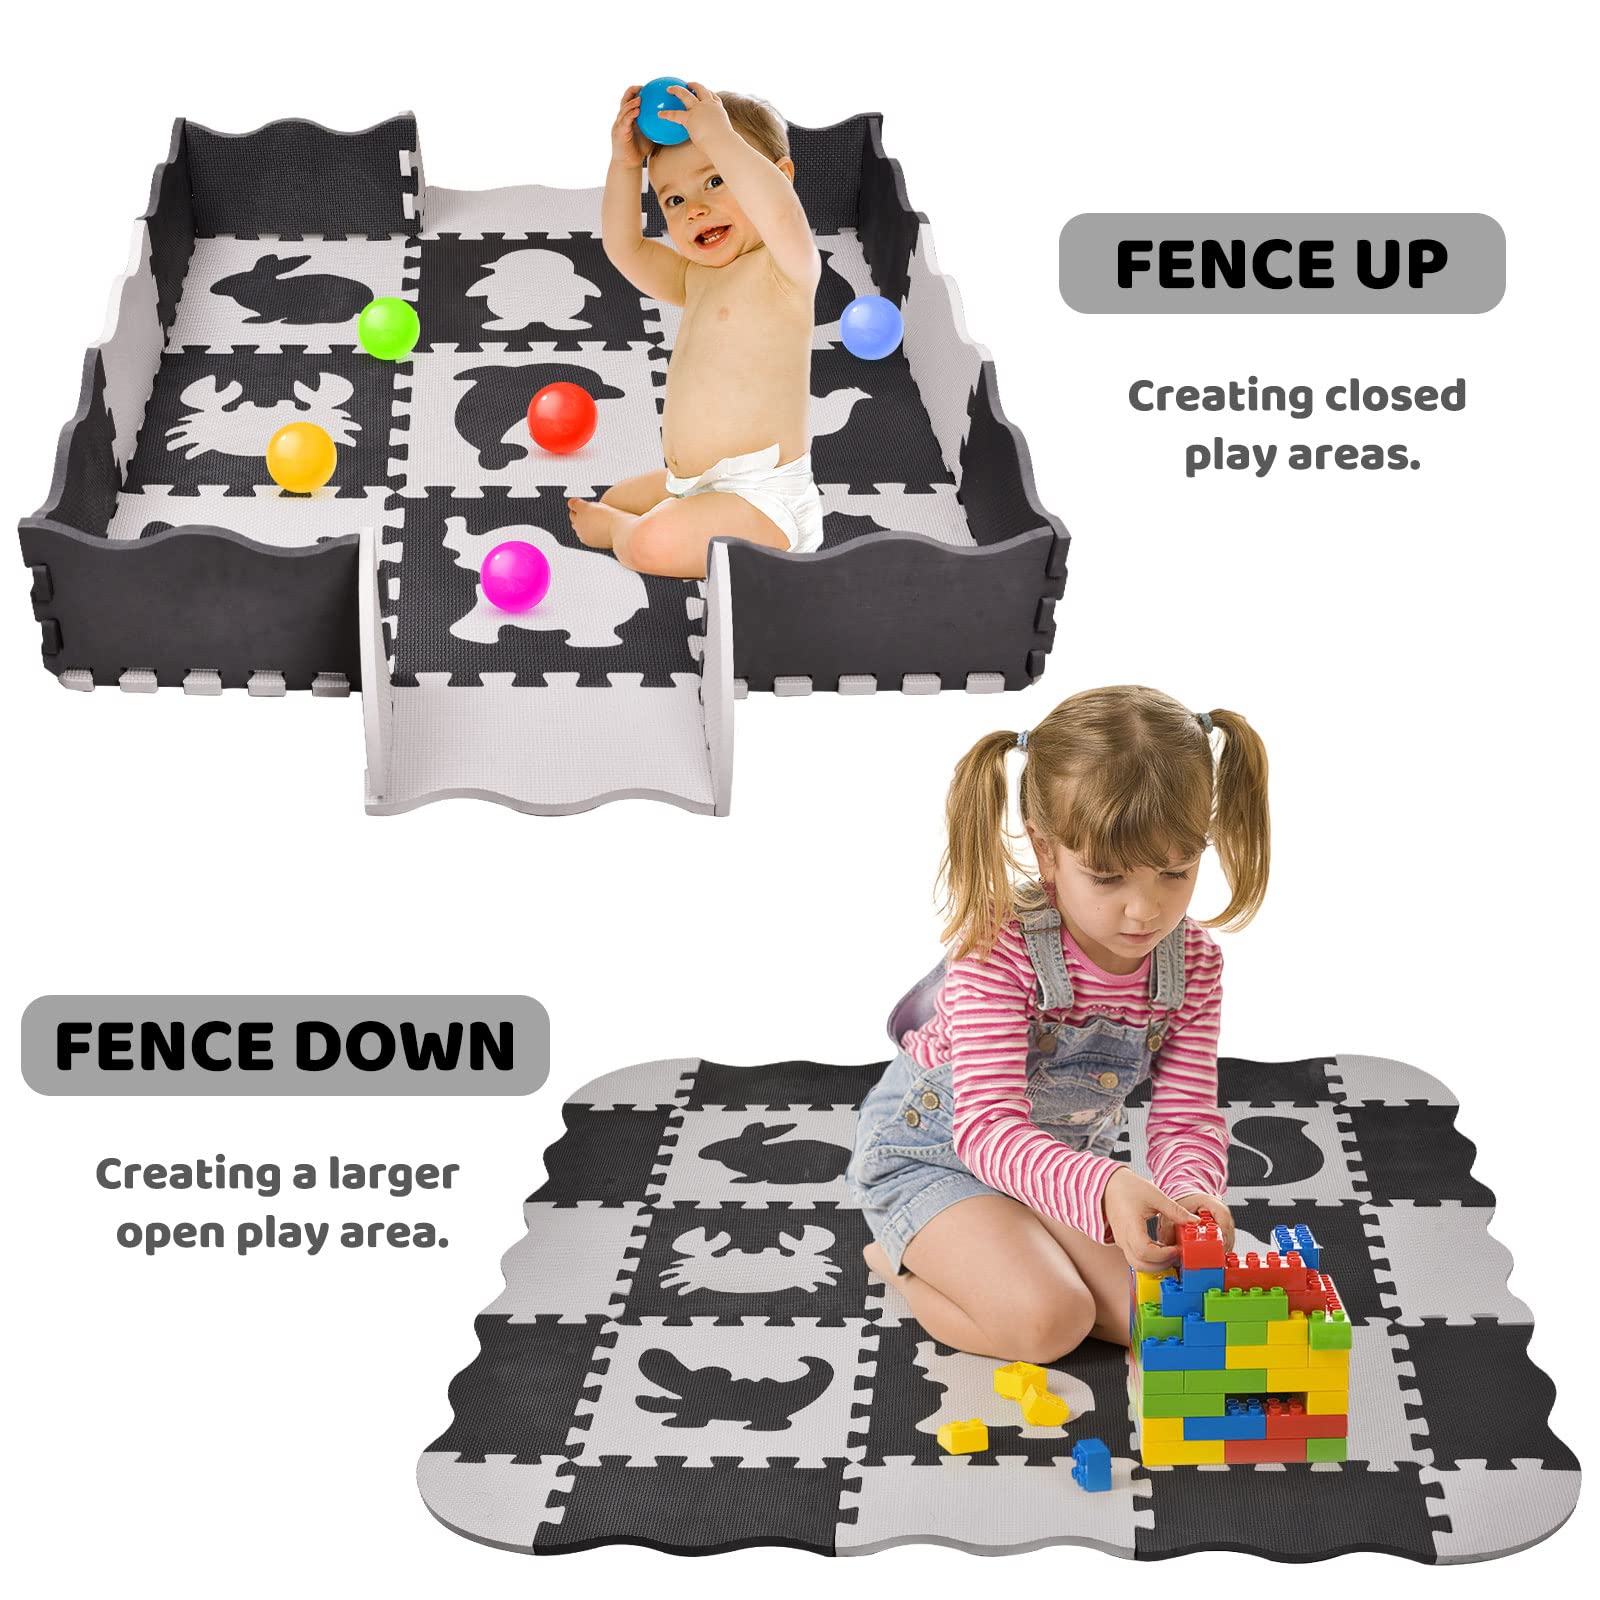 FUN LITTLE TOYS 25 PCs Baby Play Mat Interlocking Foam Floor Tiles, Animal Styles Puzzle Mat Soft Non-Toxic Crawling Mat with Fence, Activity Playmat for Toddlers Room Décor